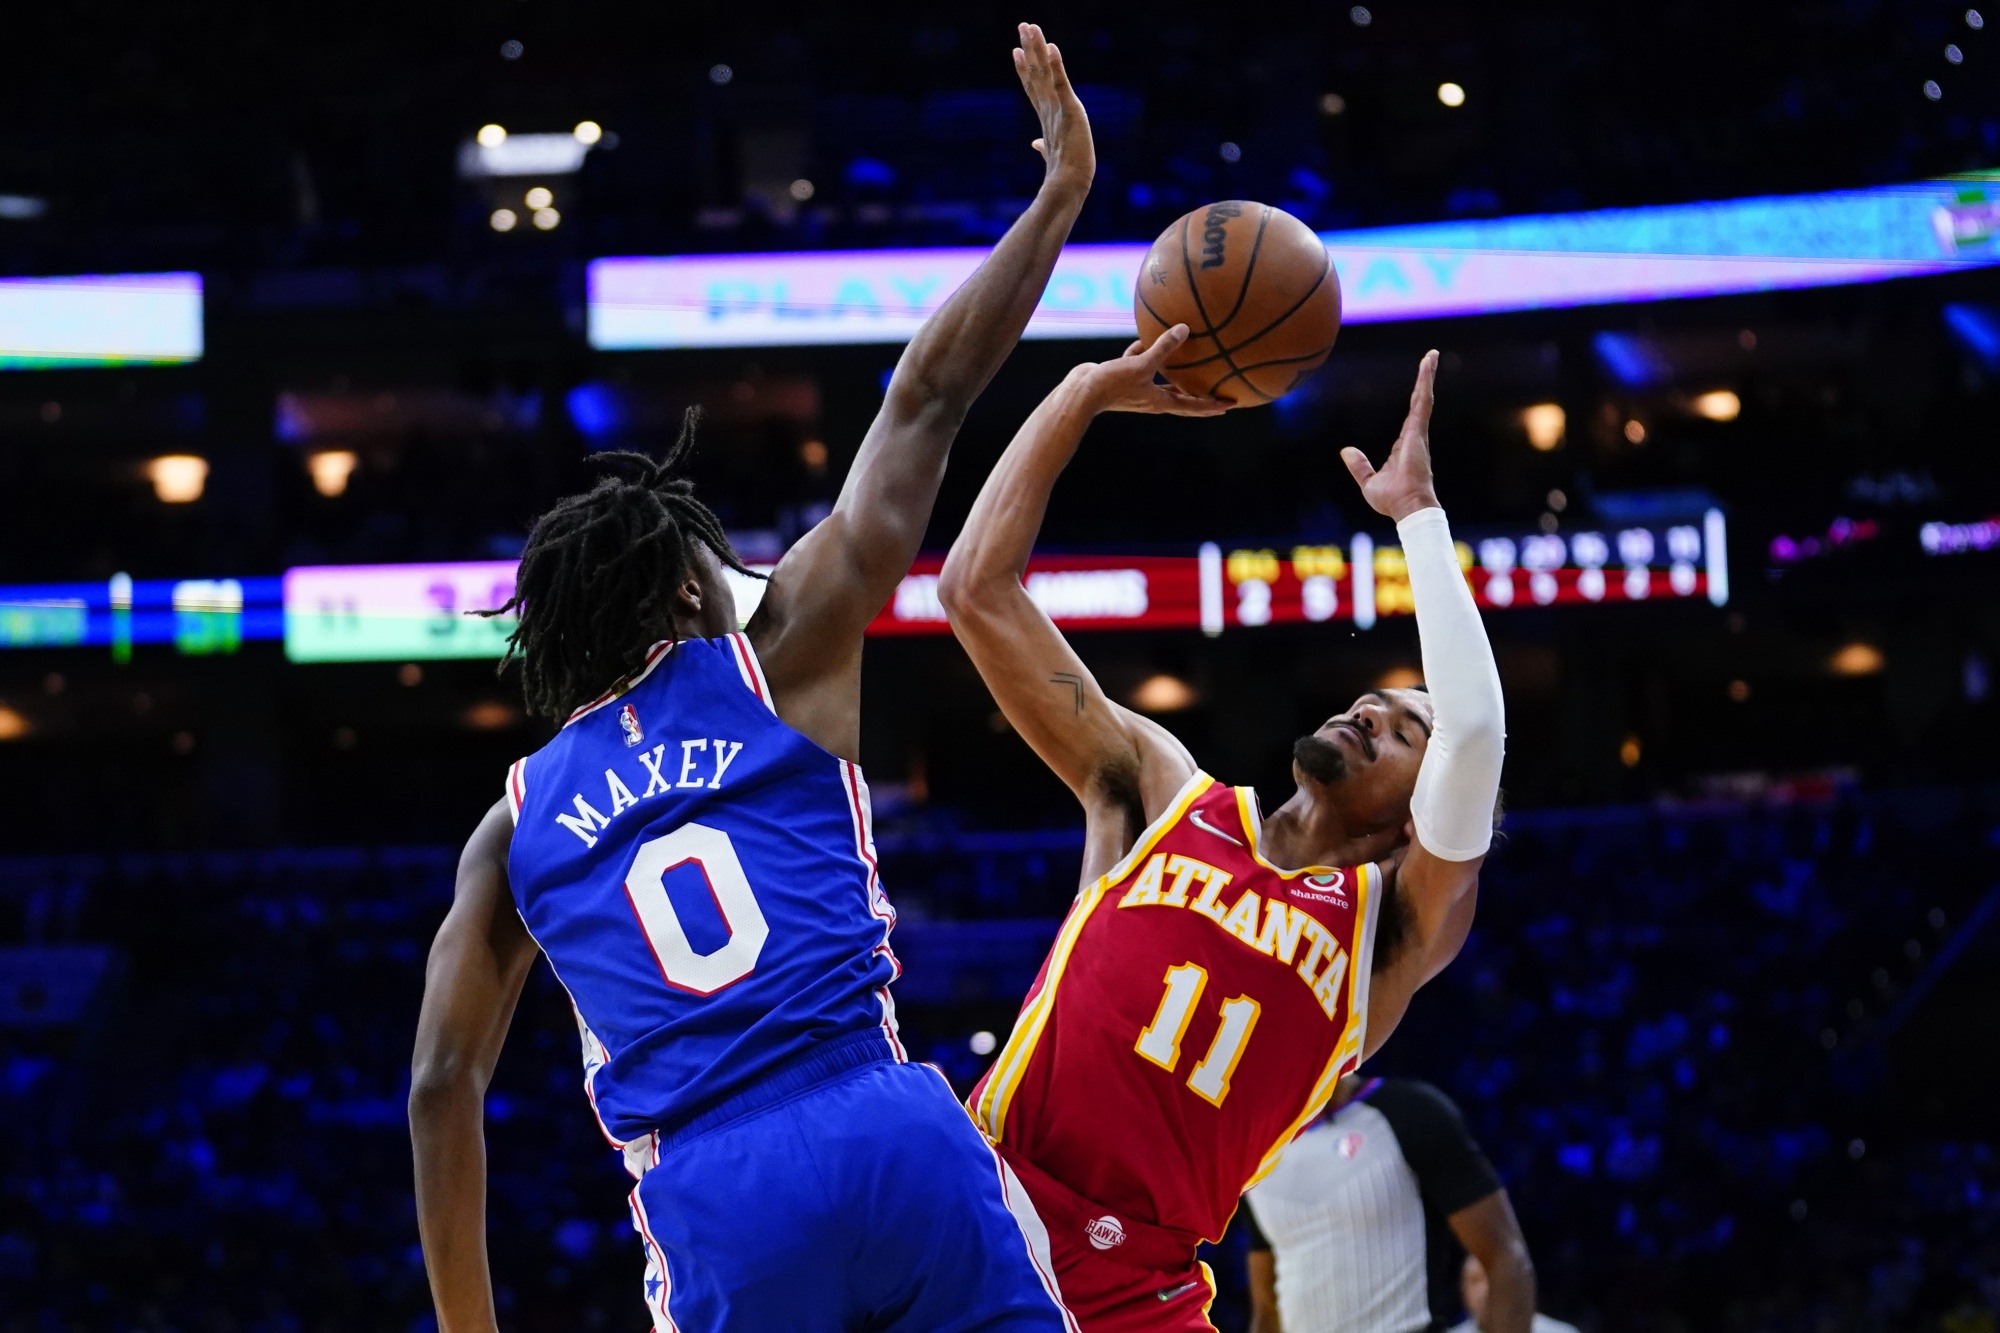 Trae Young is the star the Hawks, and the NBA, need - The Washington Post